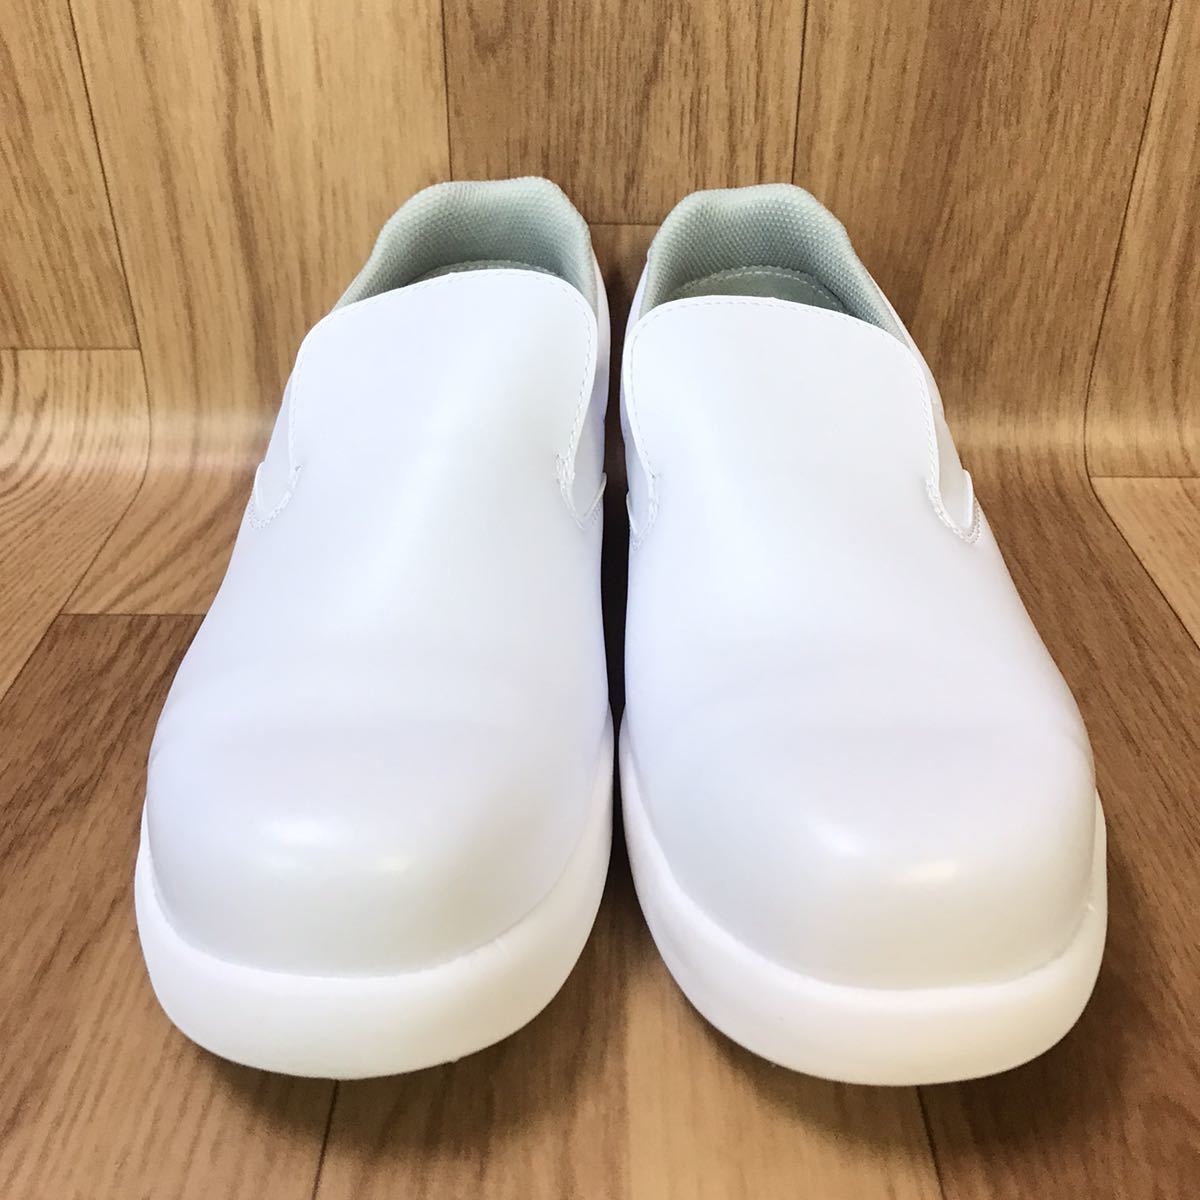  free shipping / unused / green safety wide resin . core super enduring slide work shoes HigRIP 4TH high grip NHF-600 white 23.5cm/ high grip sole safety shoes 